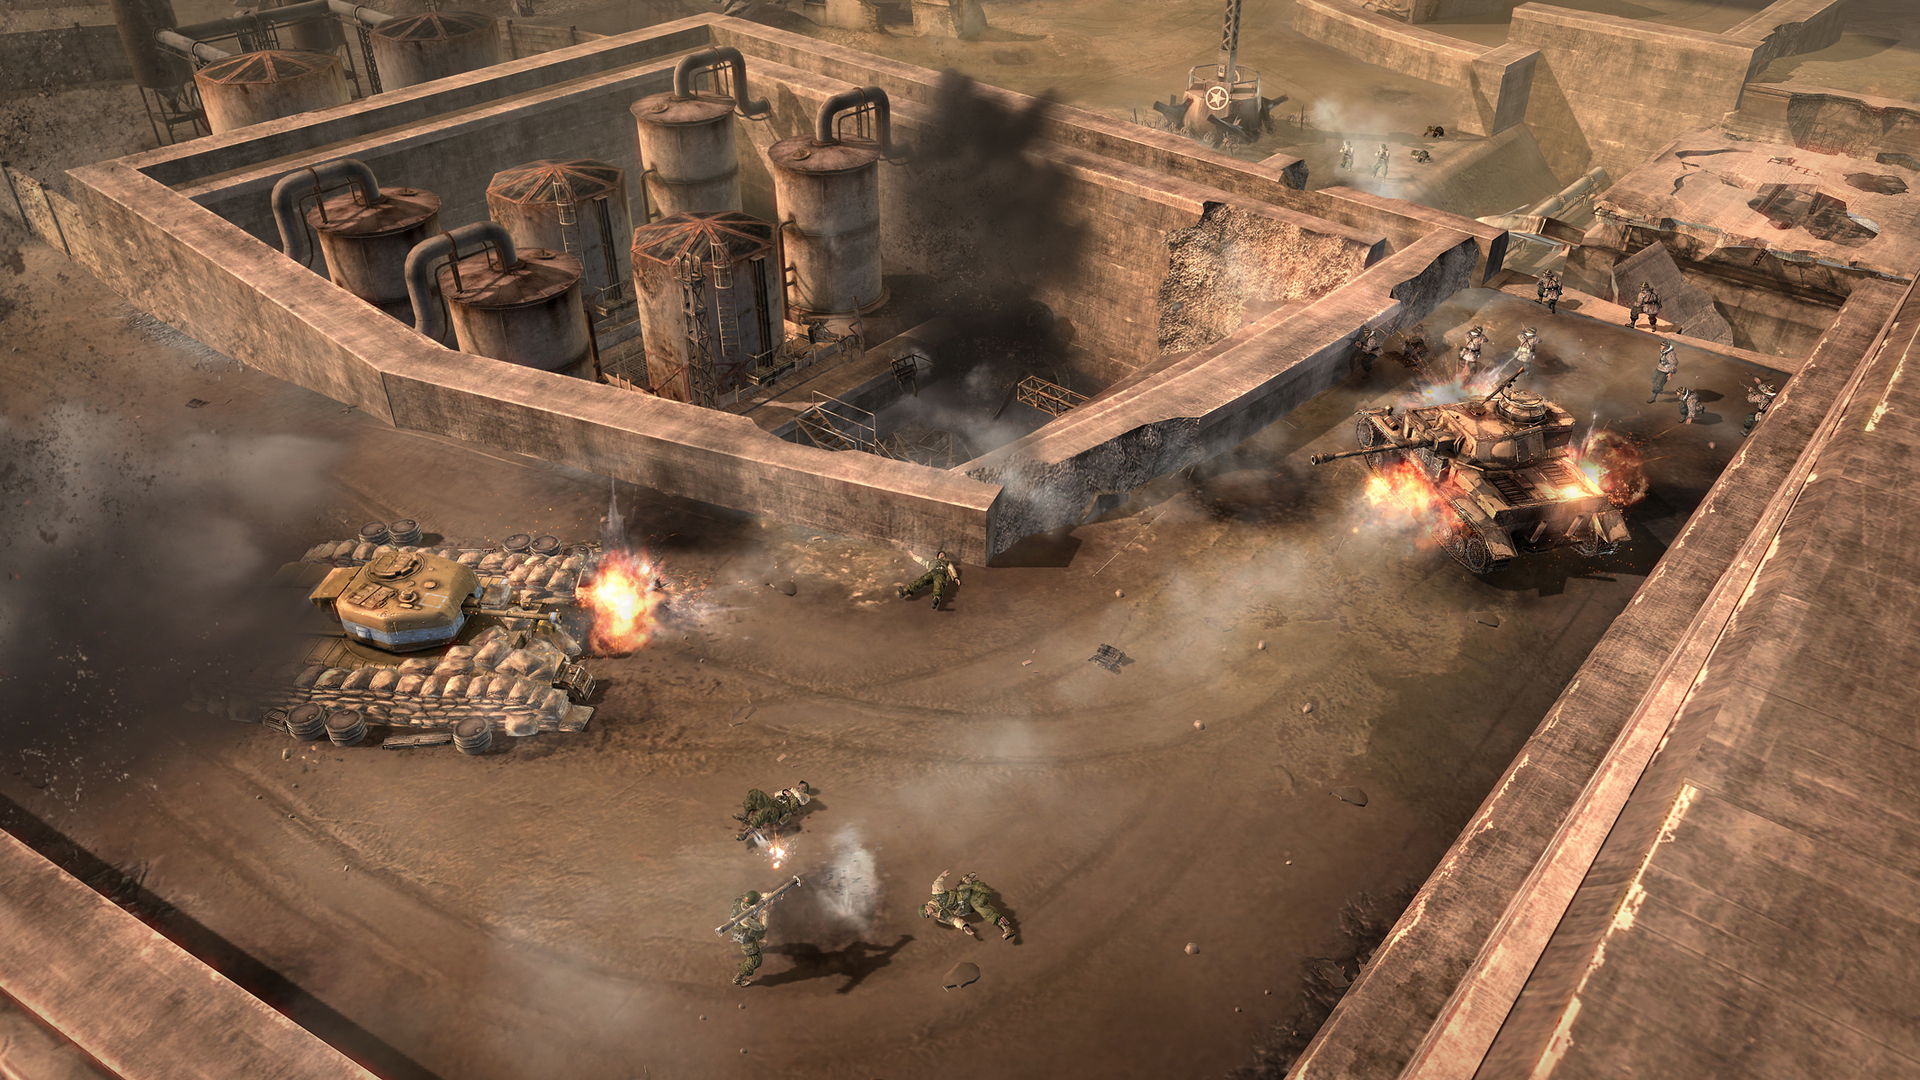 company of heroes tales of valor download